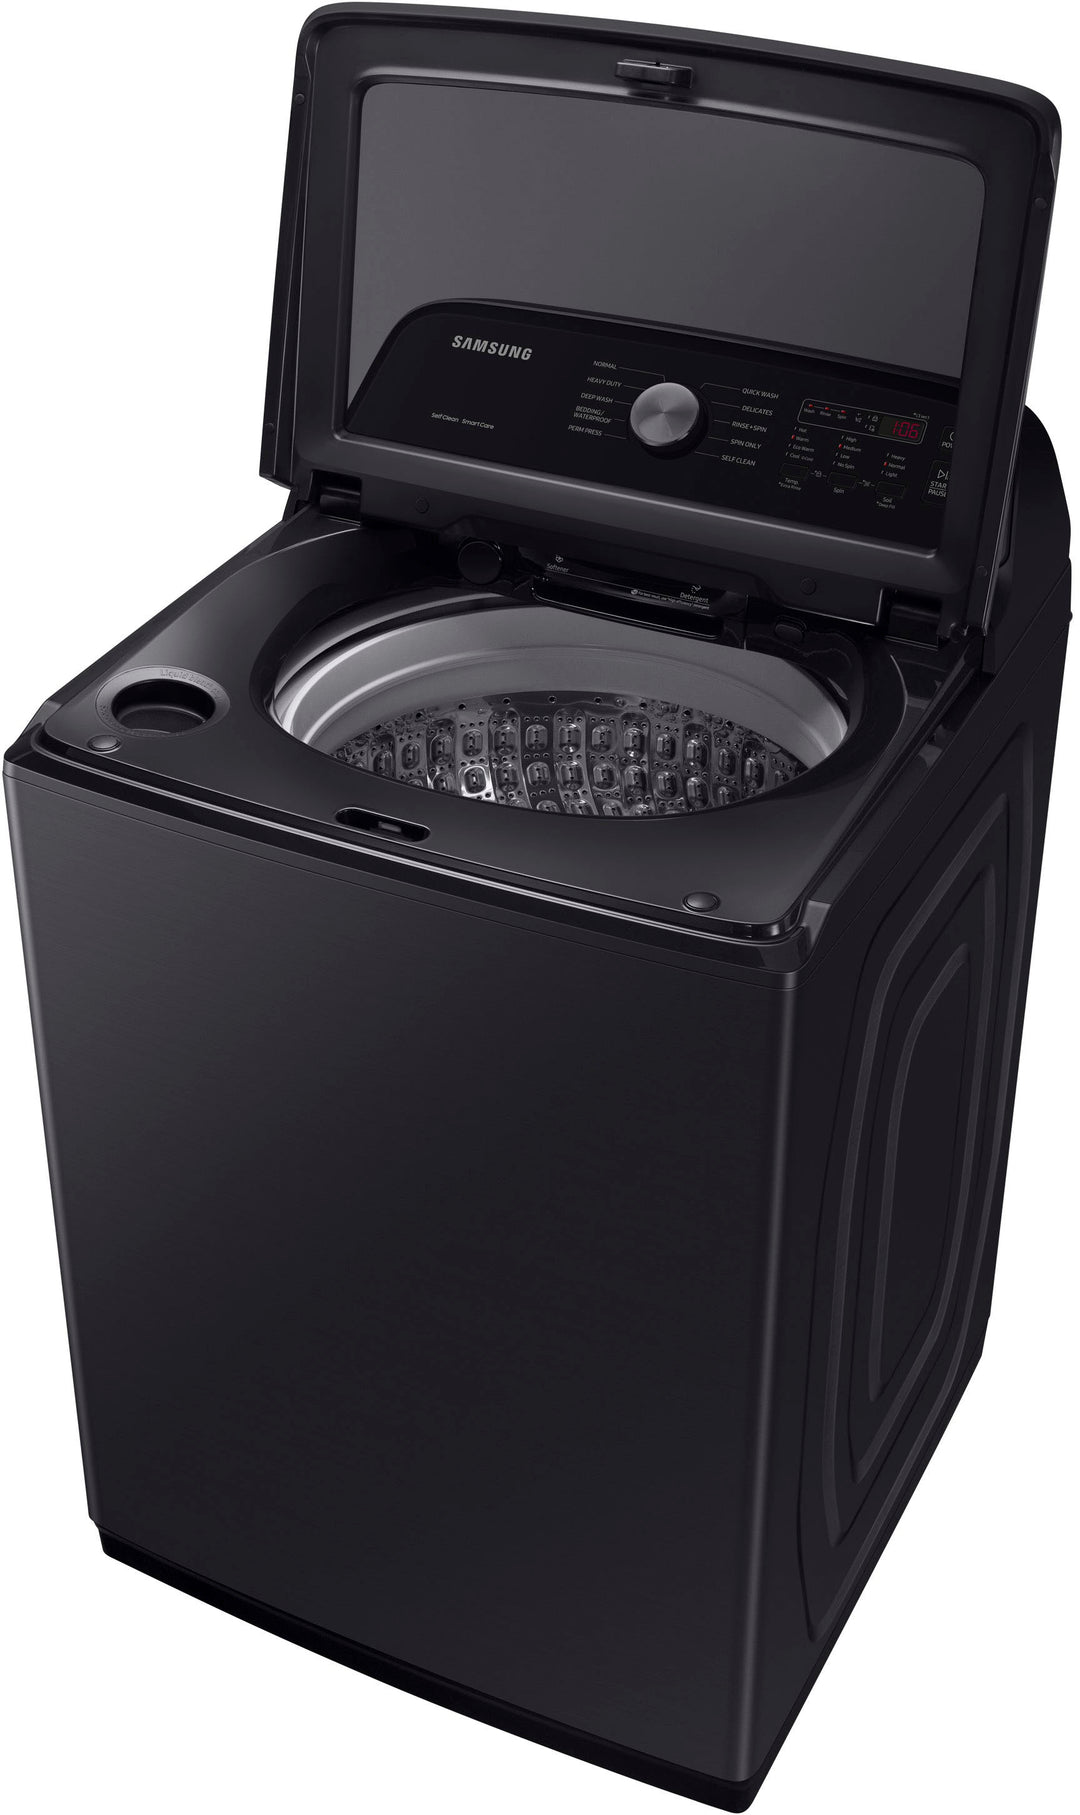 Samsung - 5.0 cu. ft. Large Capacity Top Load Washer with Deep Fill and EZ Access Tub - Brushed Black_9